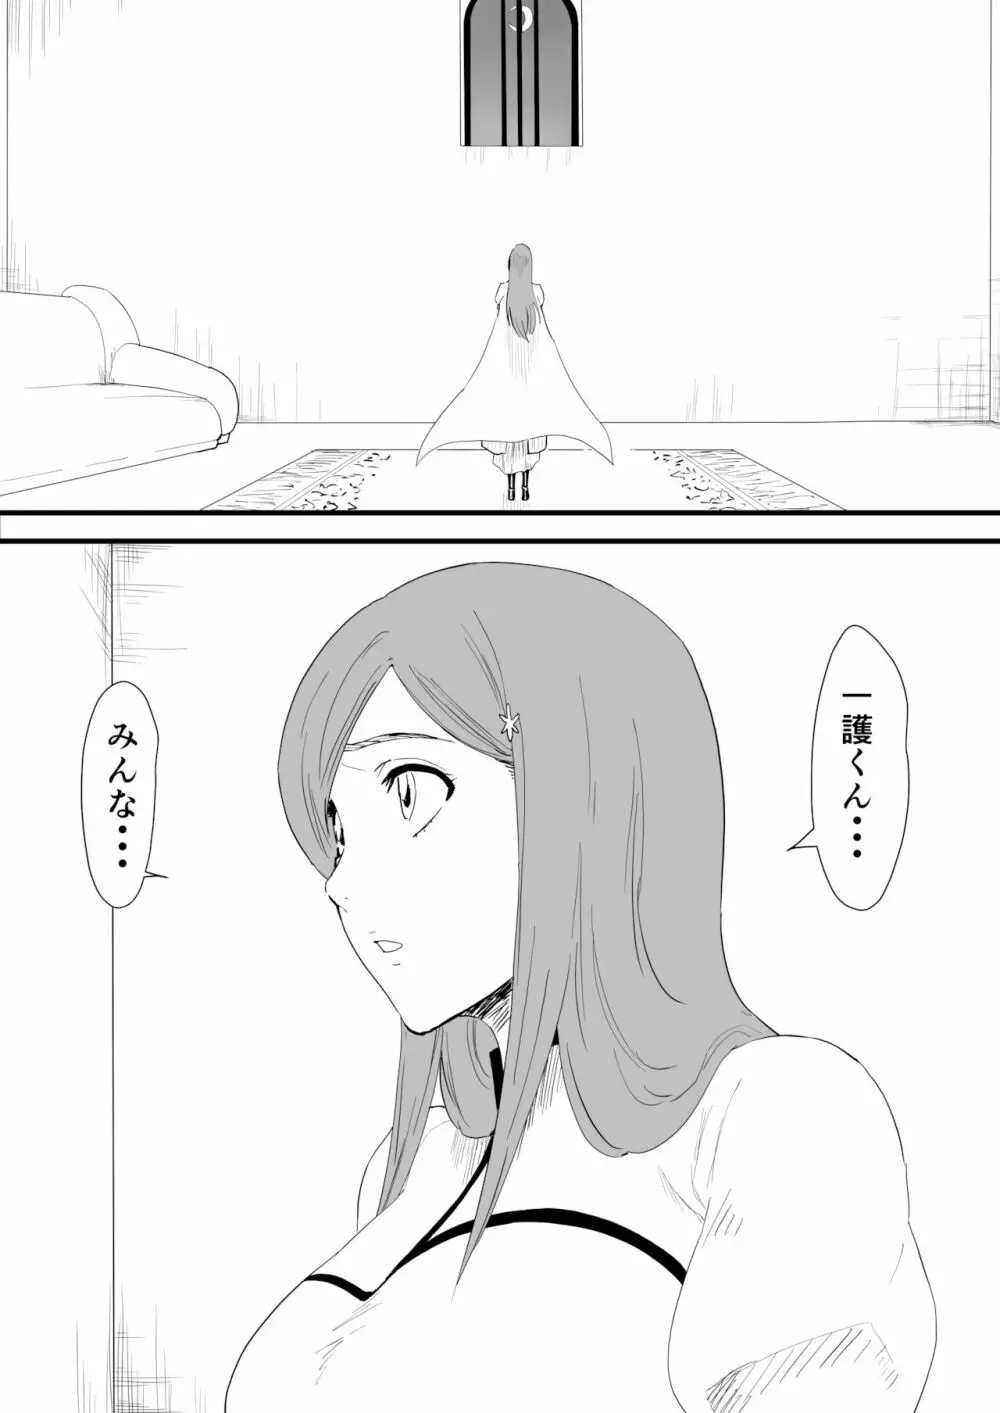 Orihime is attacked by goblin-like hollows - page1